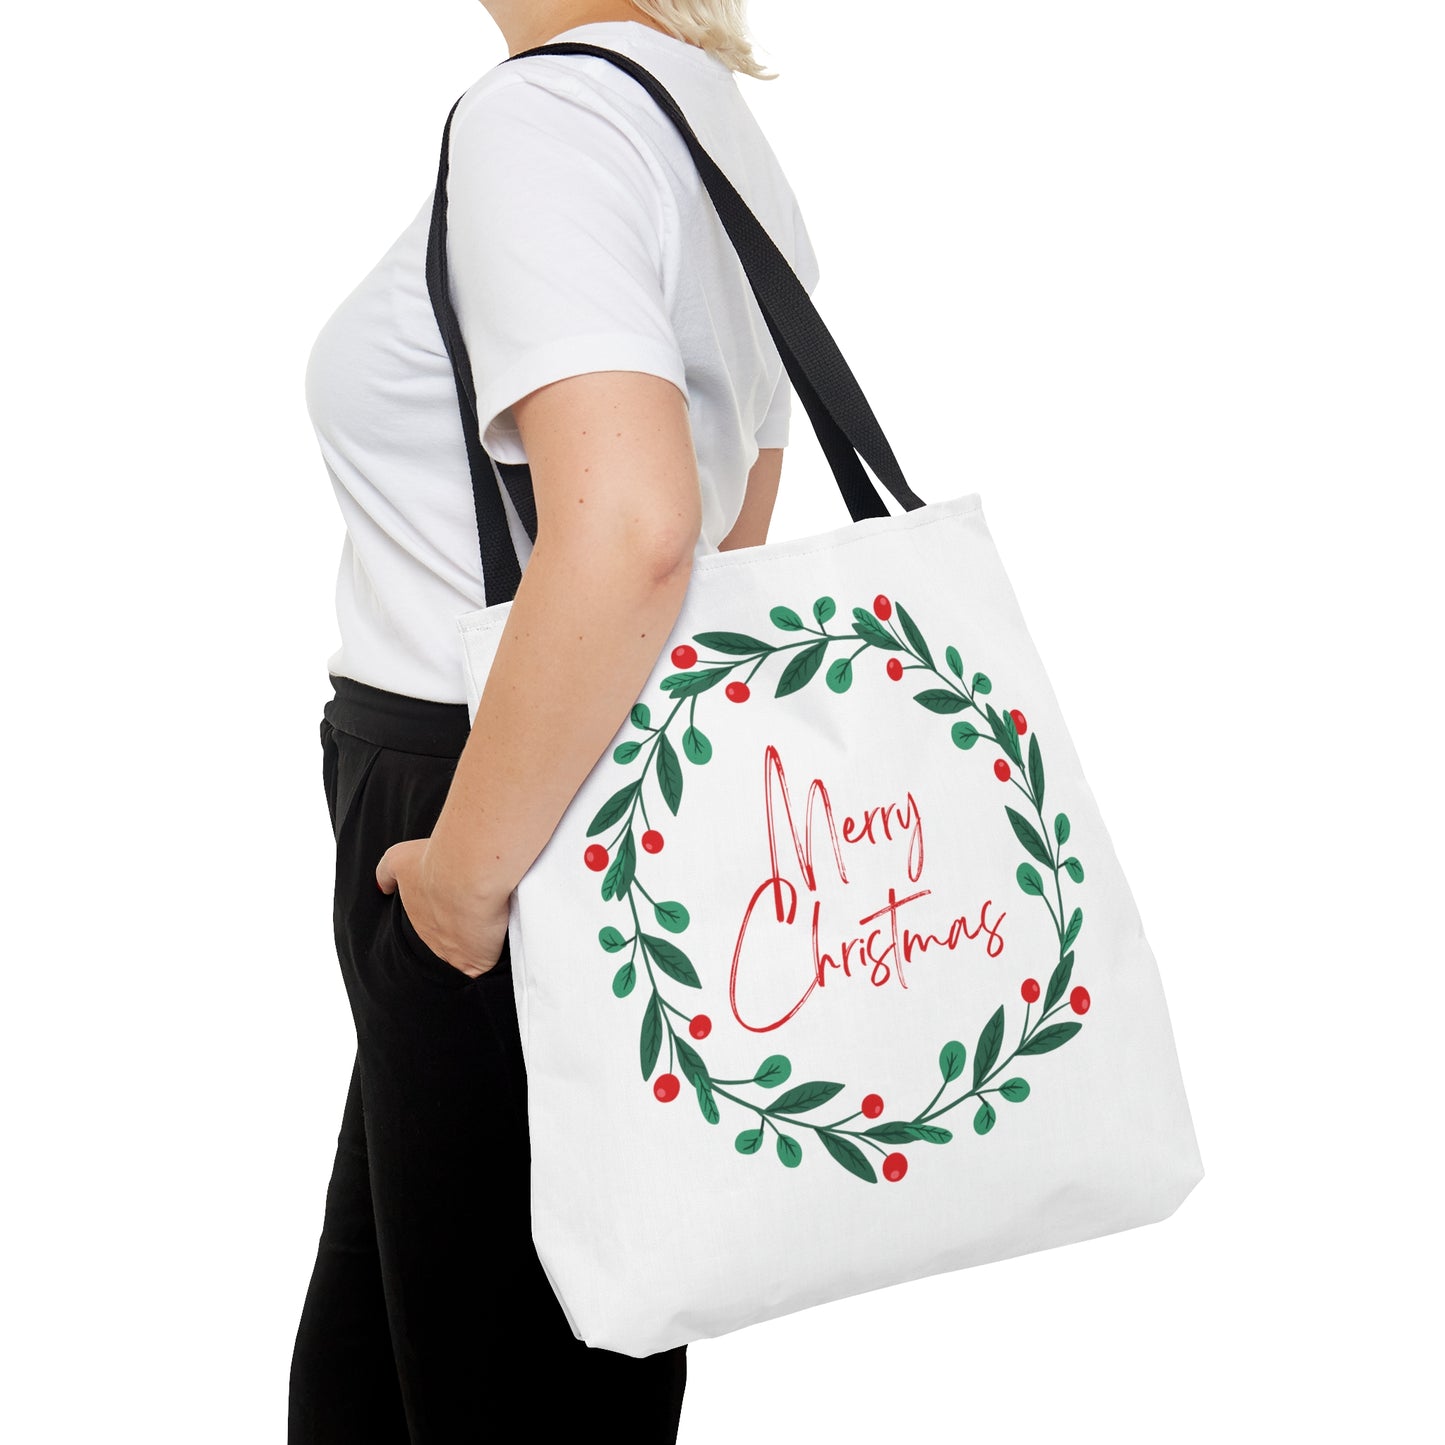 Merry Christmas Printed Canvas Tote Bags